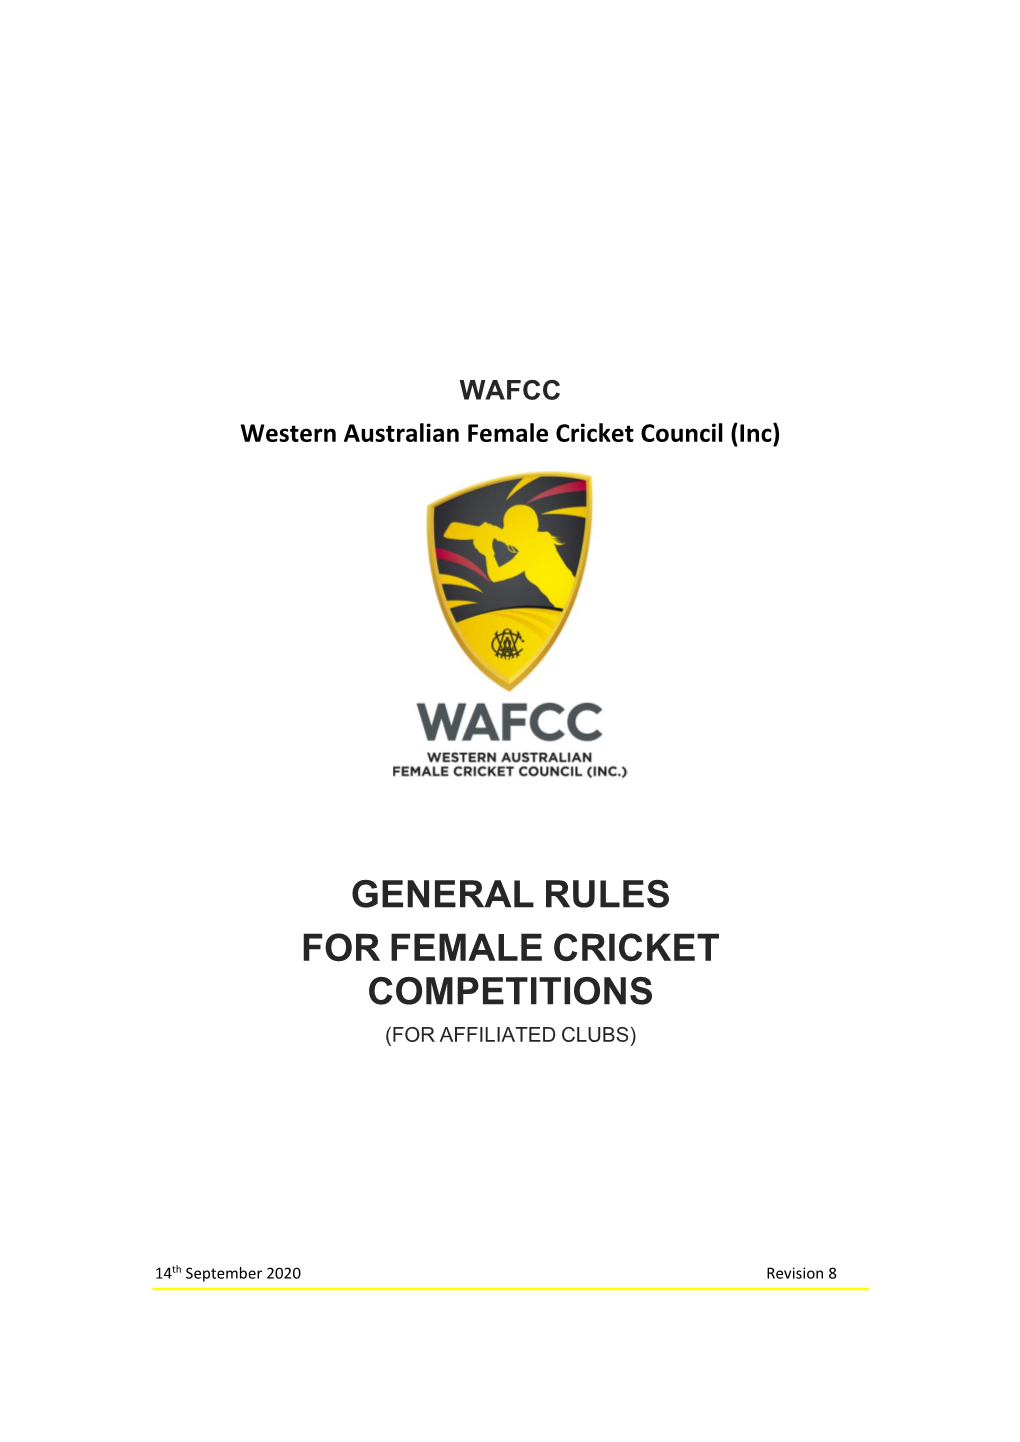 Wafcc General Rules General Rules for Female Cricket Competitions